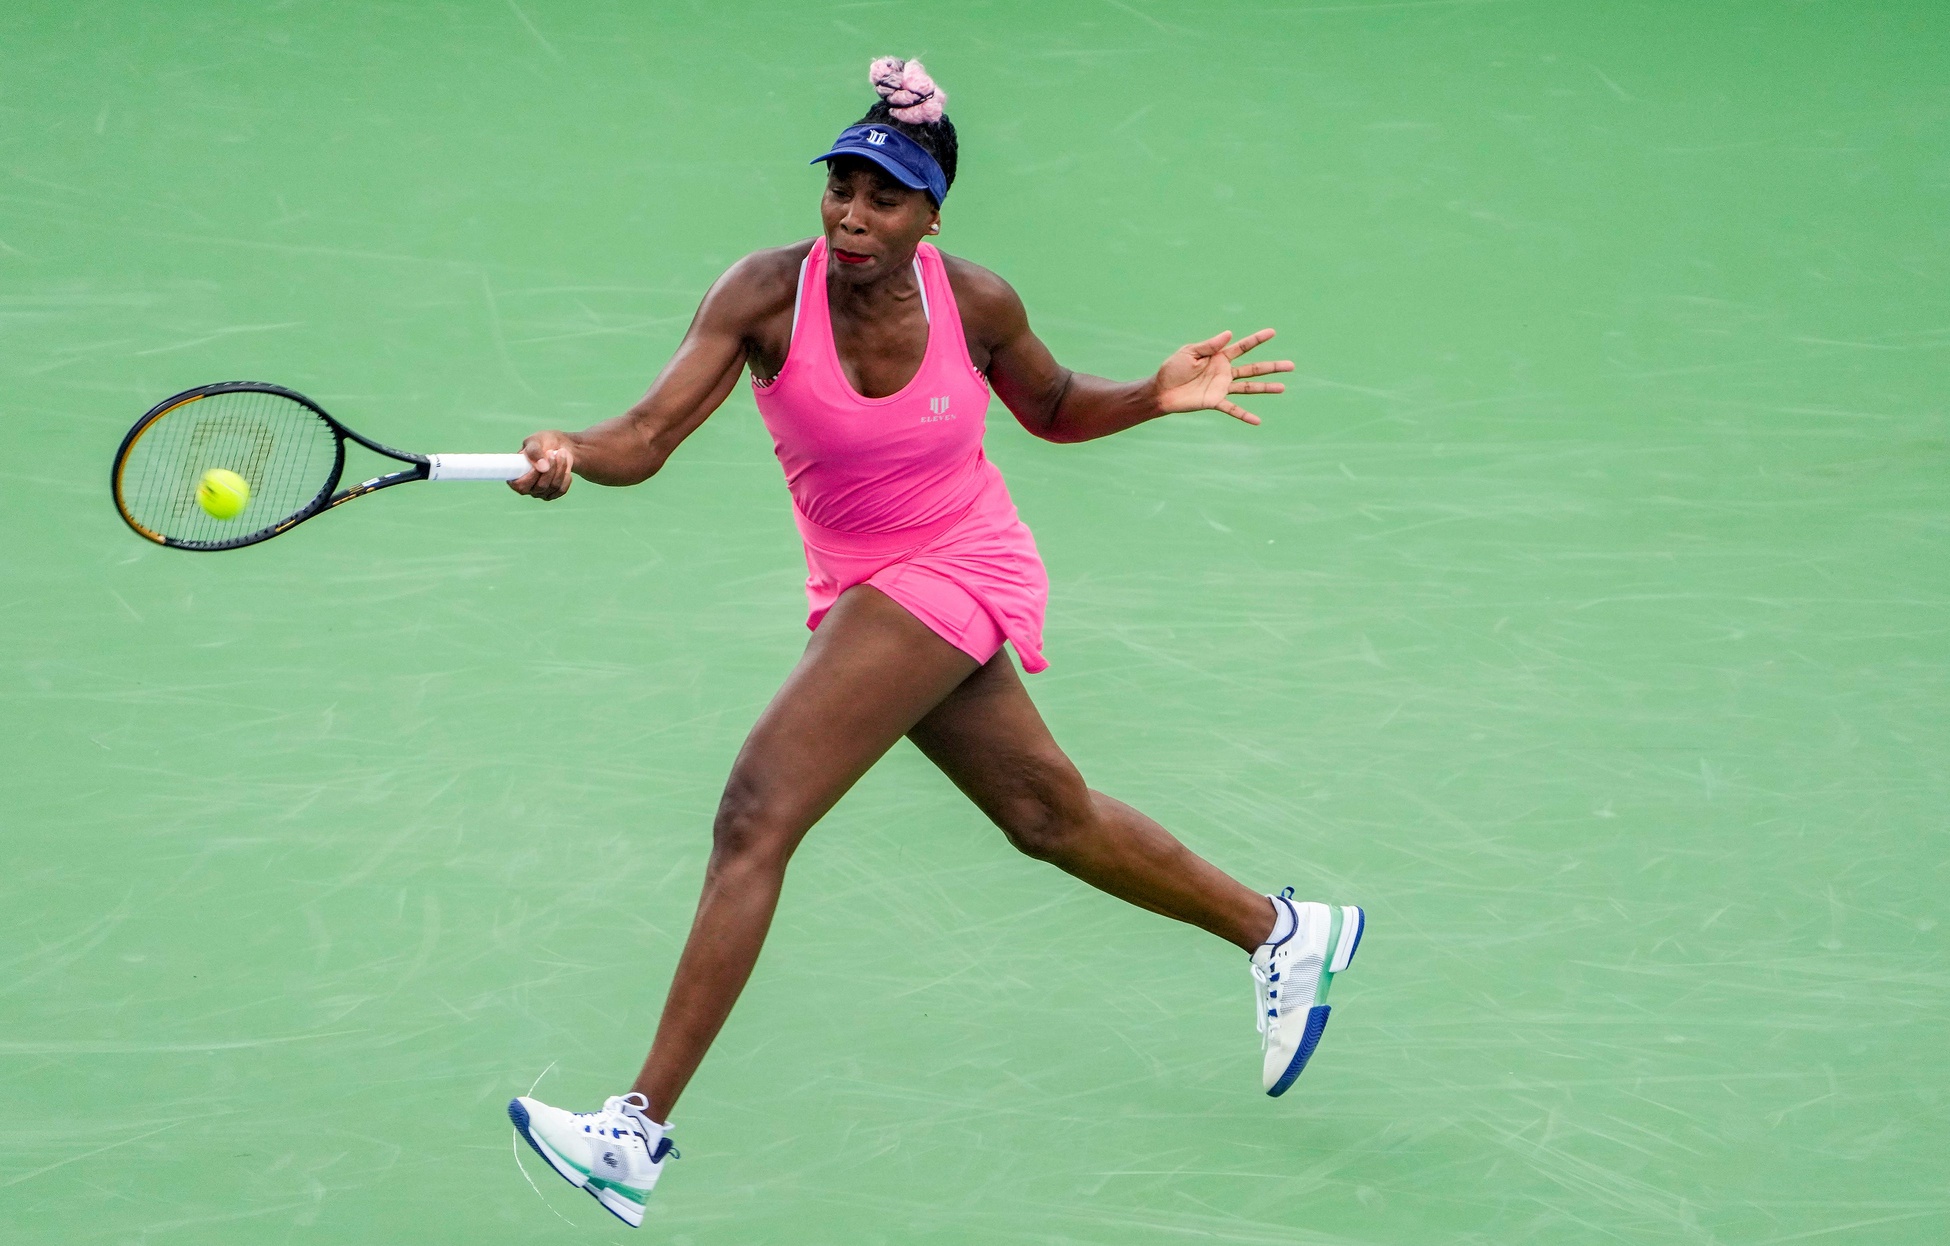 Venus Williams in action ahead of the US Open.